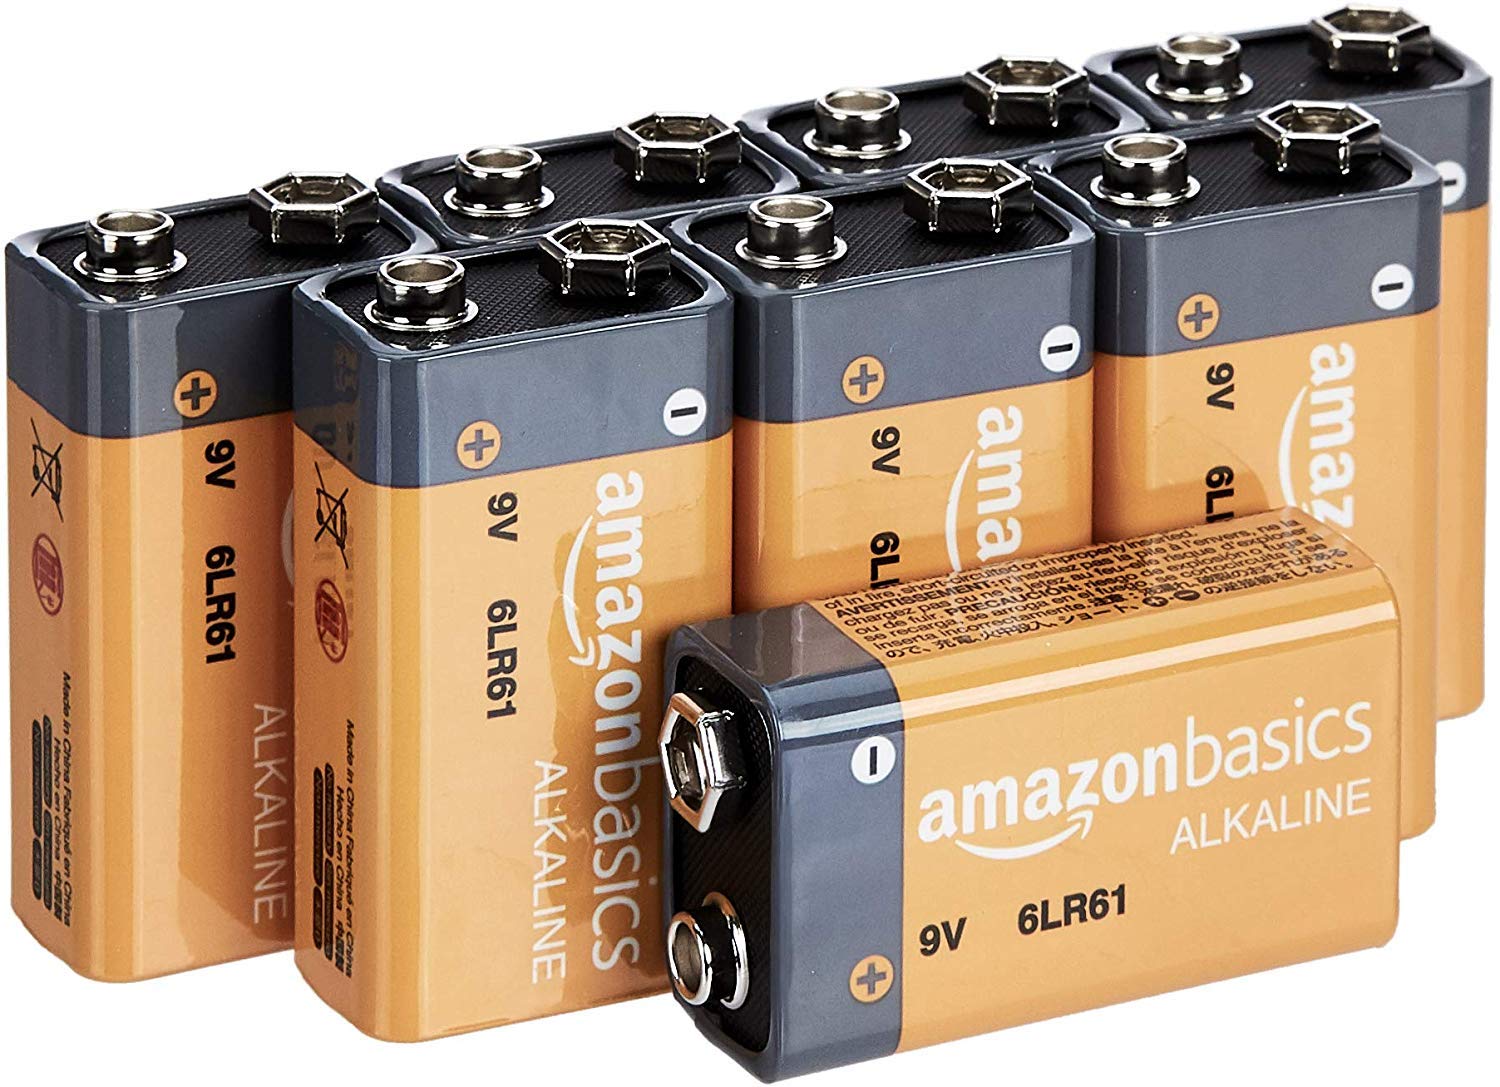 $3/mo - Finance  Basics 4-Pack 9 Volt Alkaline Performance  All-Purpose Batteries, 5-Year Shelf Life, Packaging May Vary